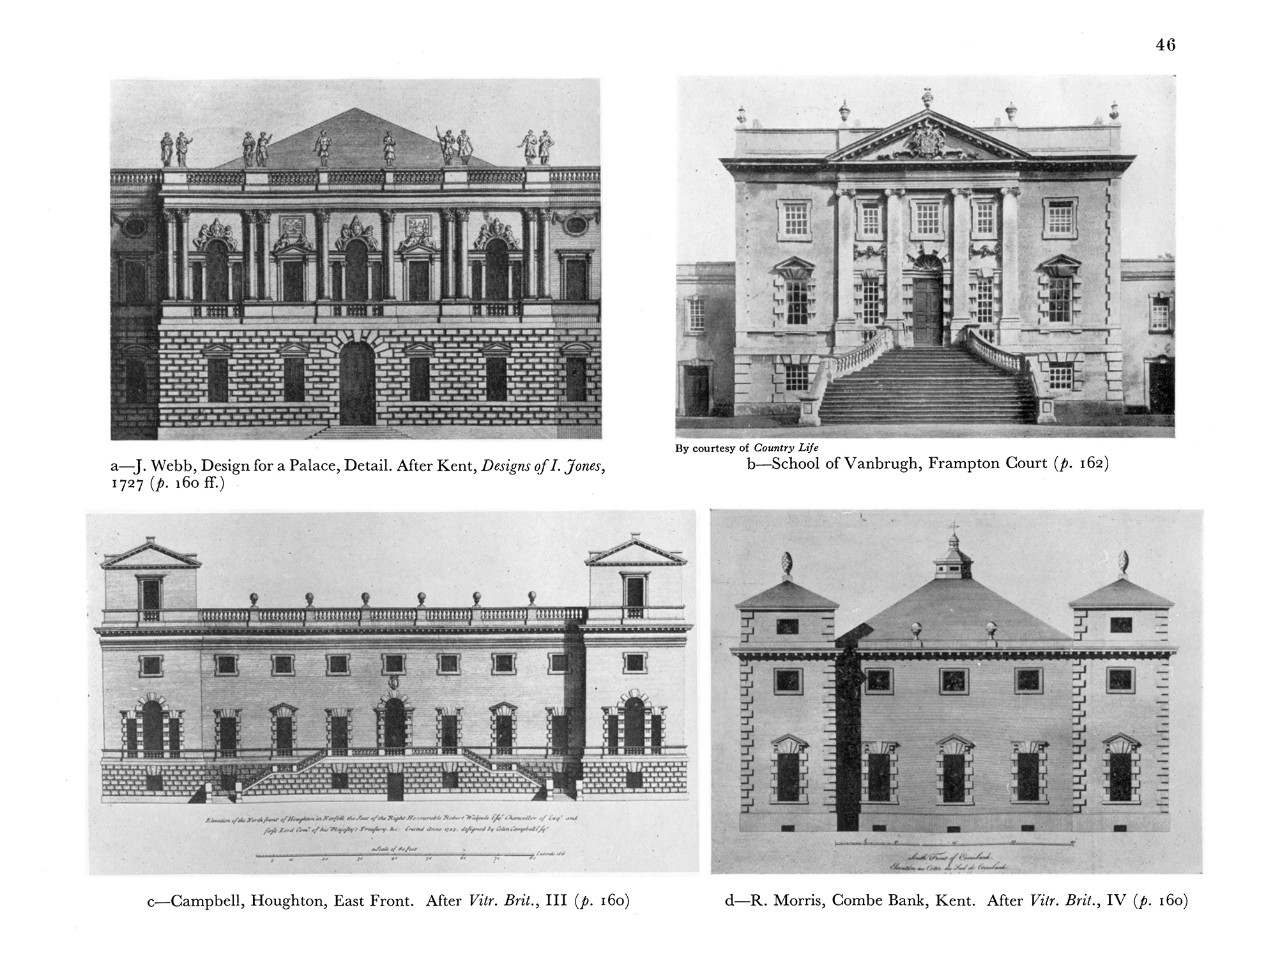 Pseudo-Palladian Elements in English Neo-Classical Architecture